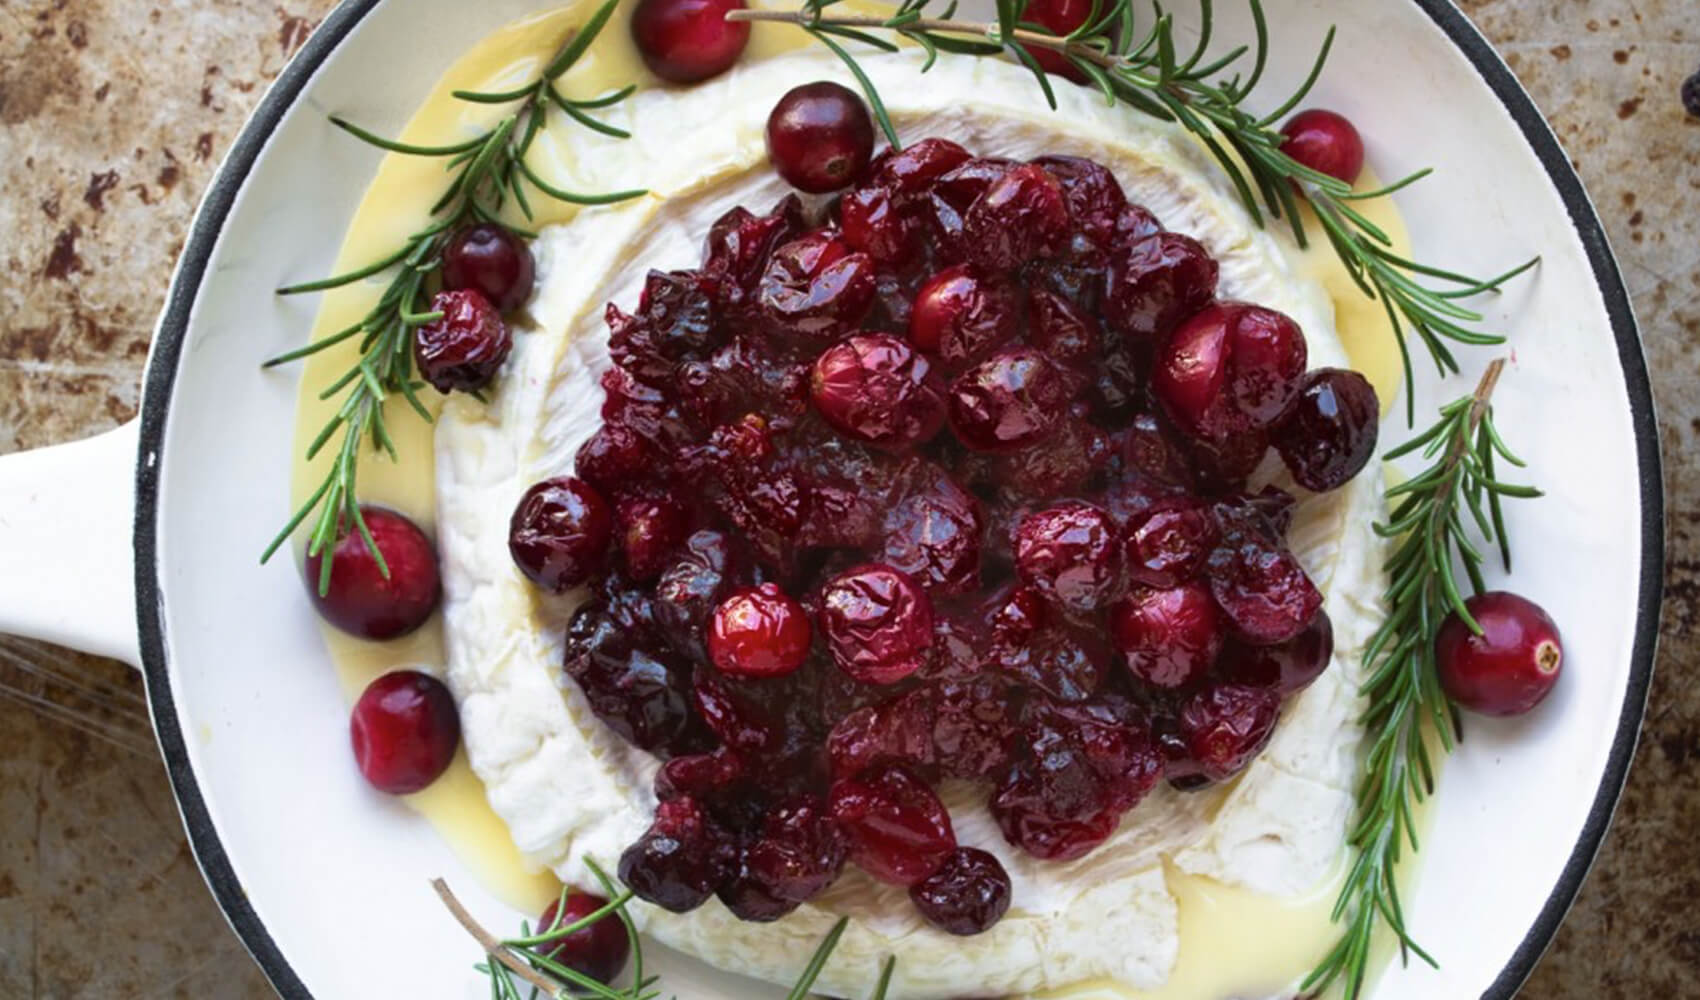 Baked Brie with Maple Roasted Cranberries